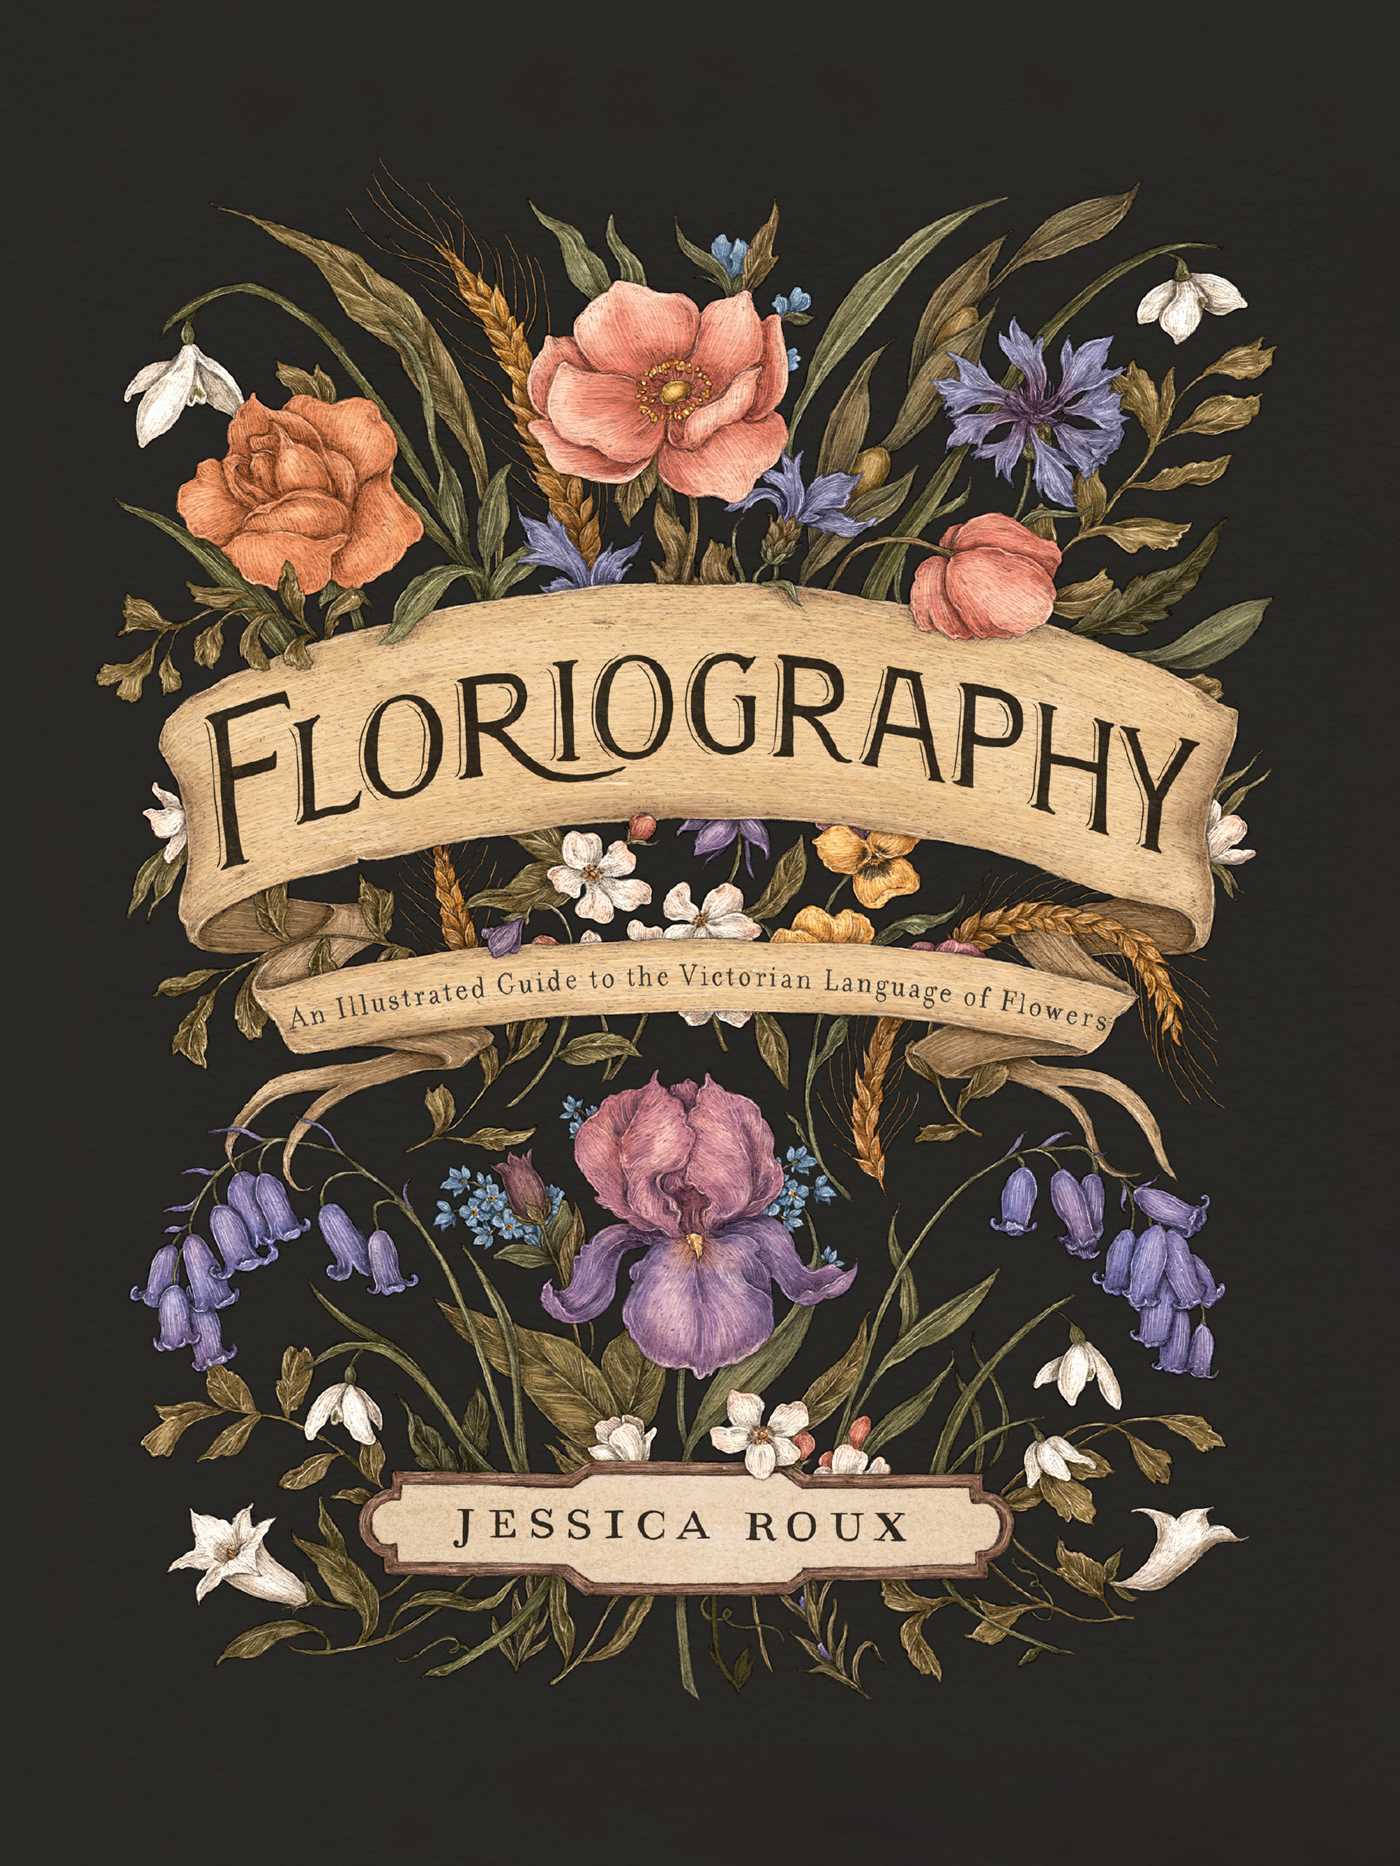 Floriography: An Illustrated Guide to the Victorian Language of Flowers (Volume 1) (Hidden Languages)